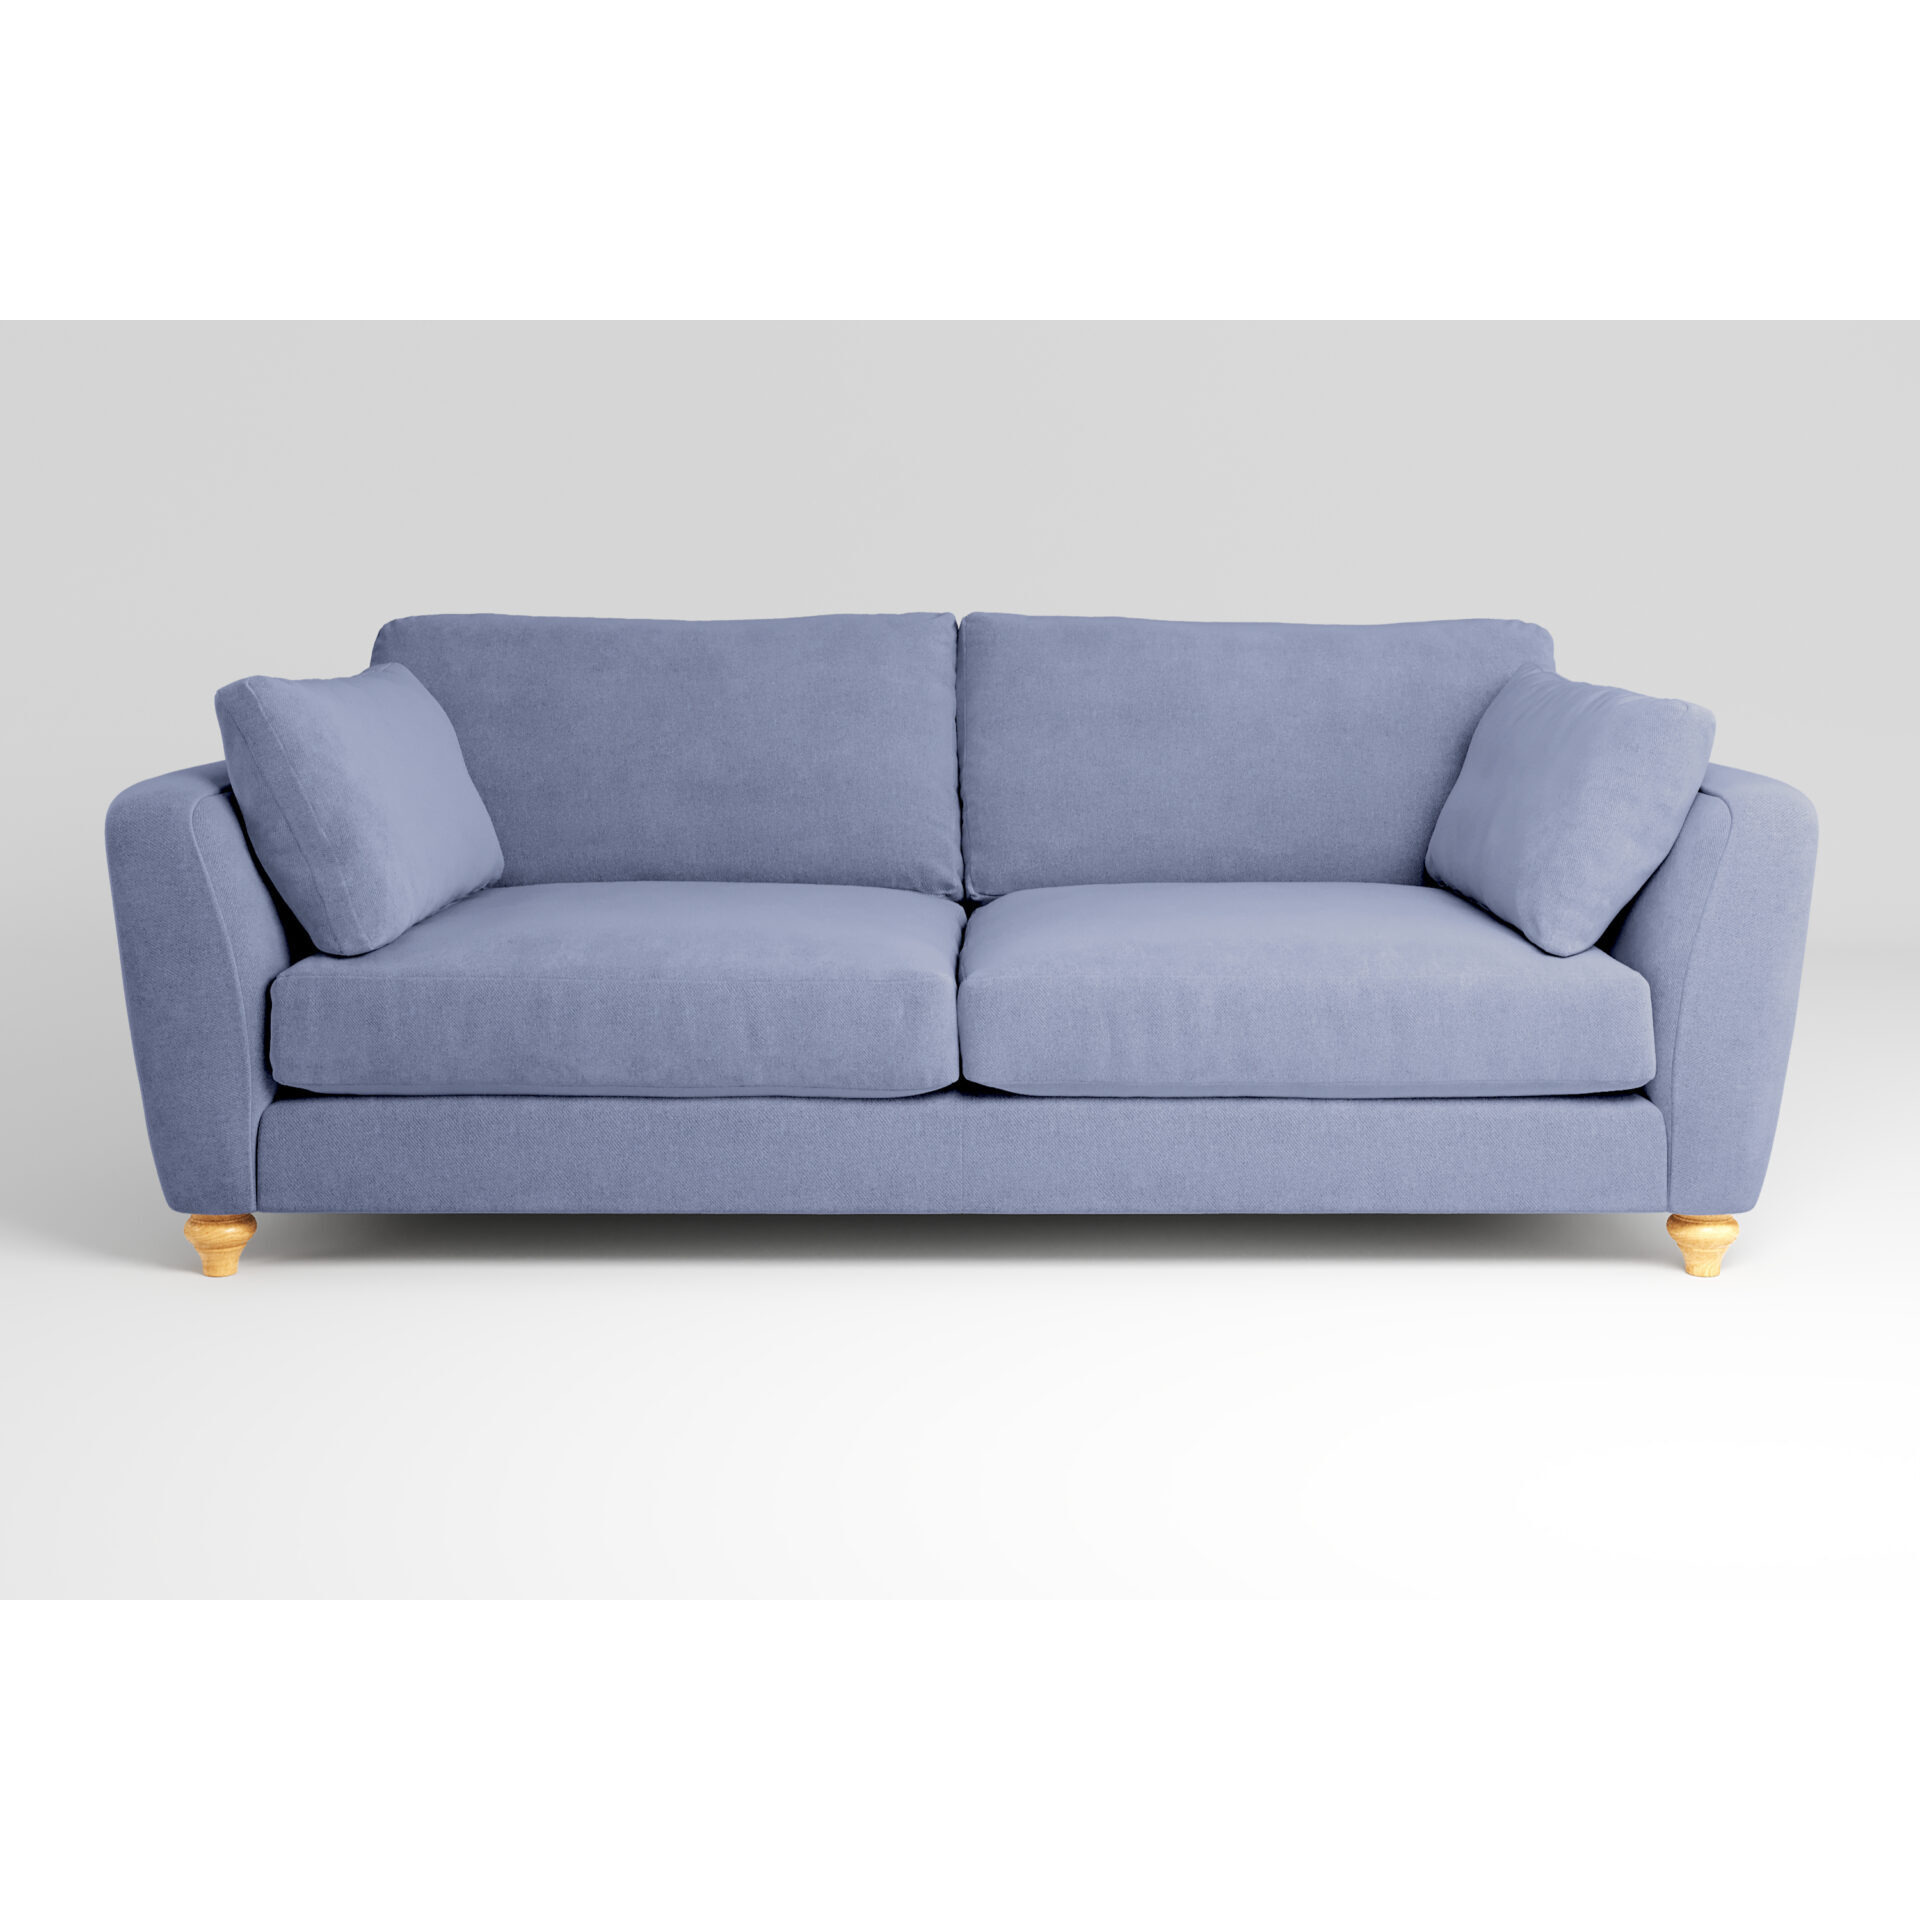 Daydream - 4 Seater Sofa in Brushed Wool Feel Denim | Comfortable and Stylish